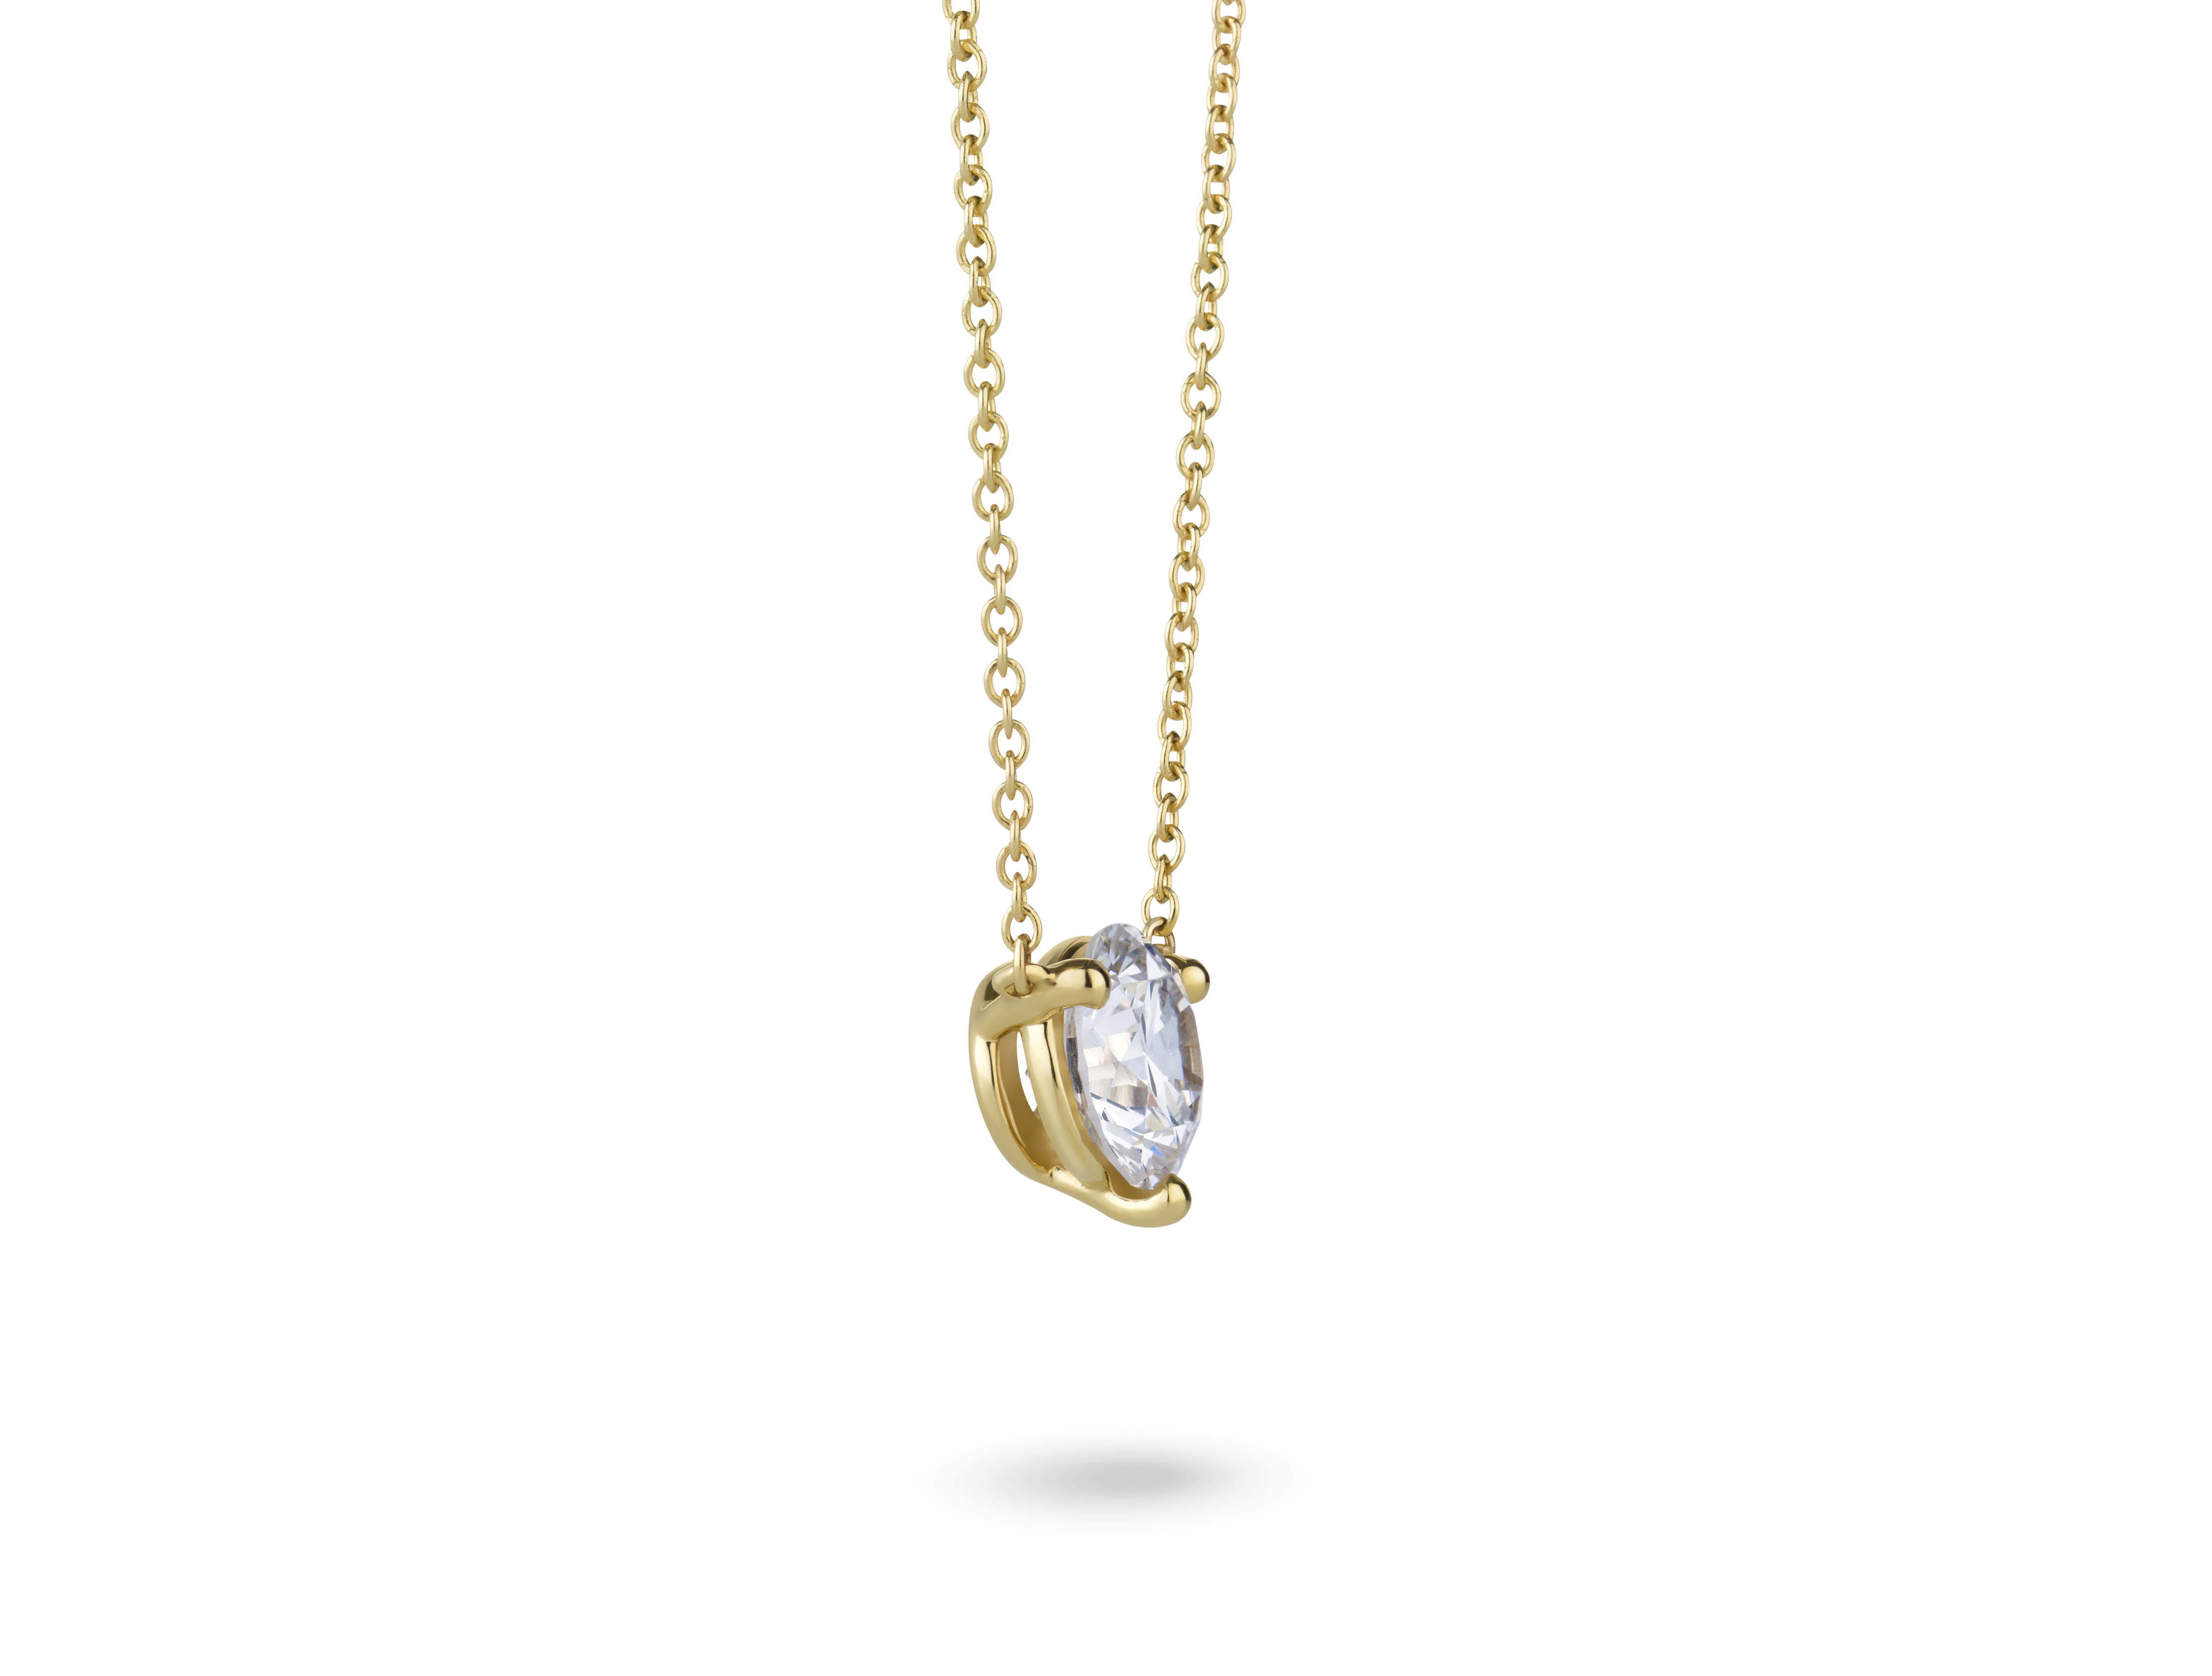 Side view of 1 carat round brilliant pendant in 10k yellow gold